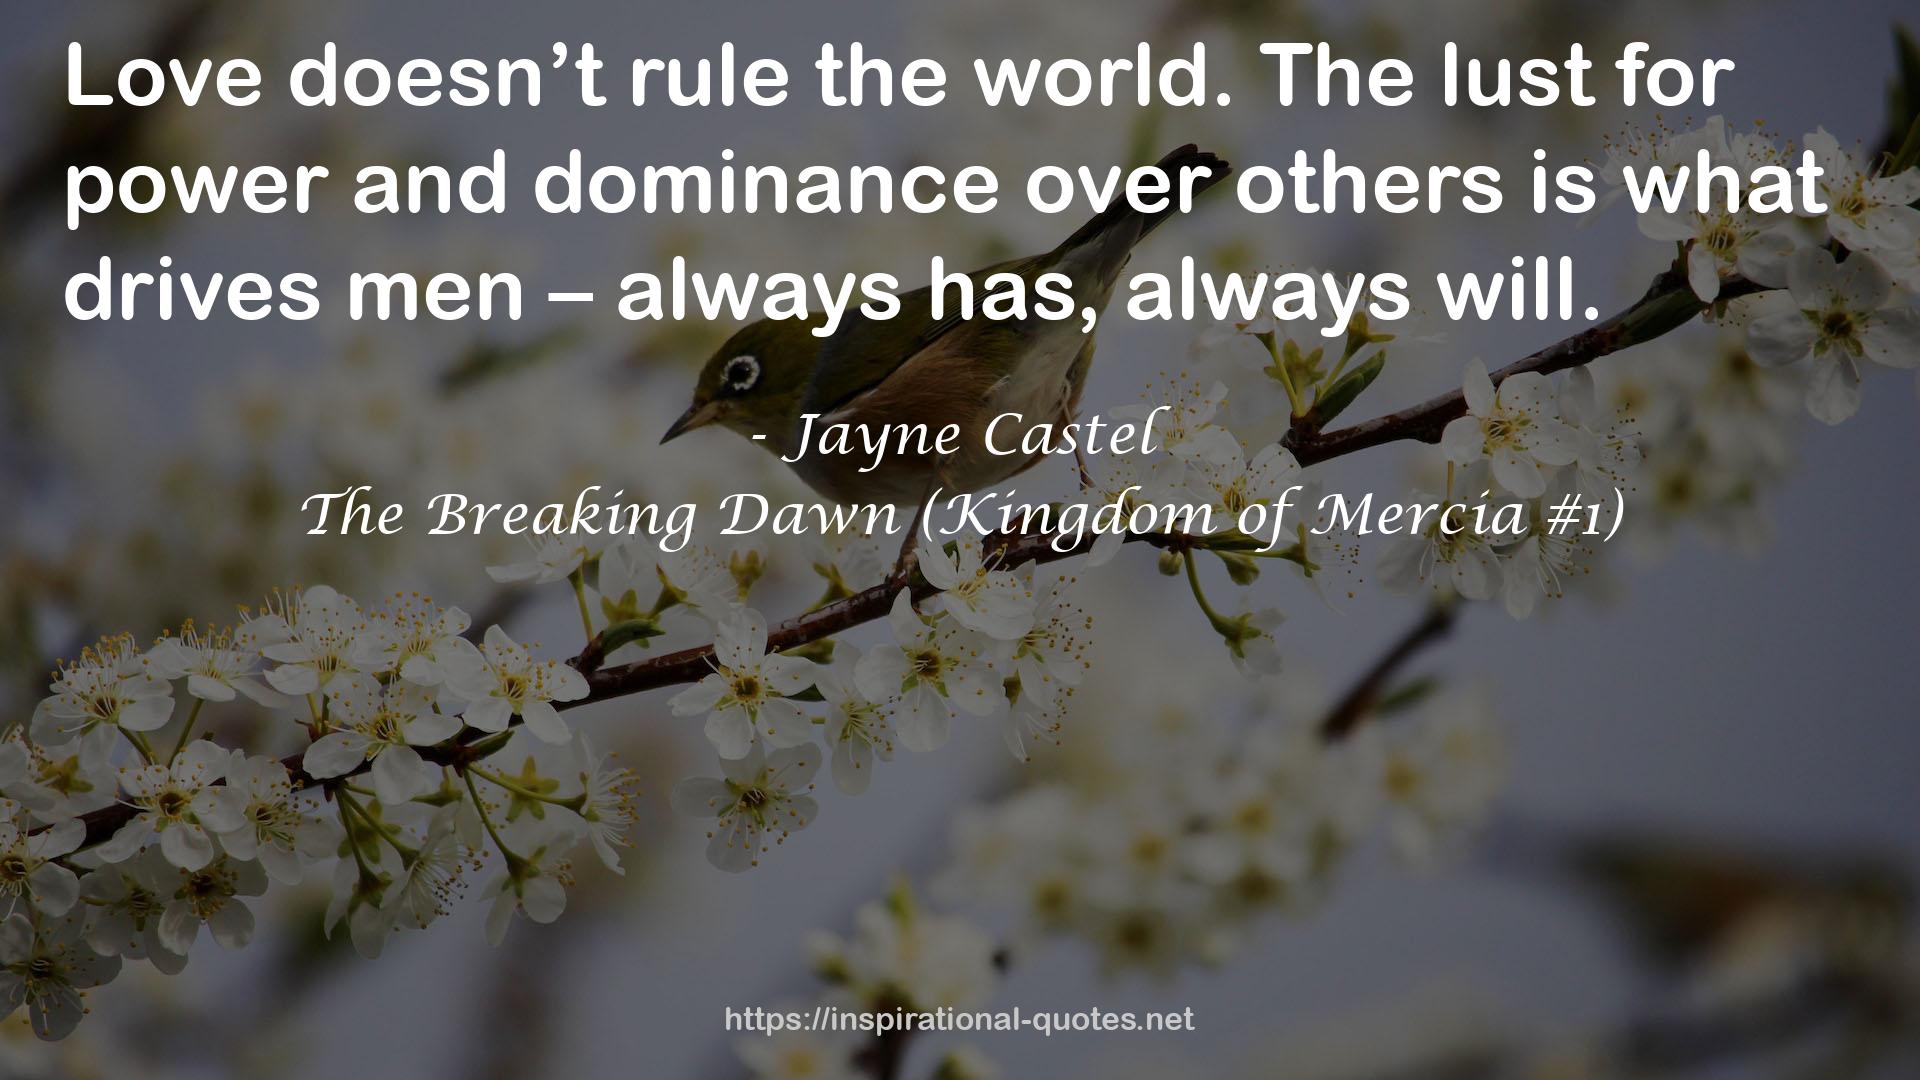 The Breaking Dawn (Kingdom of Mercia #1) QUOTES